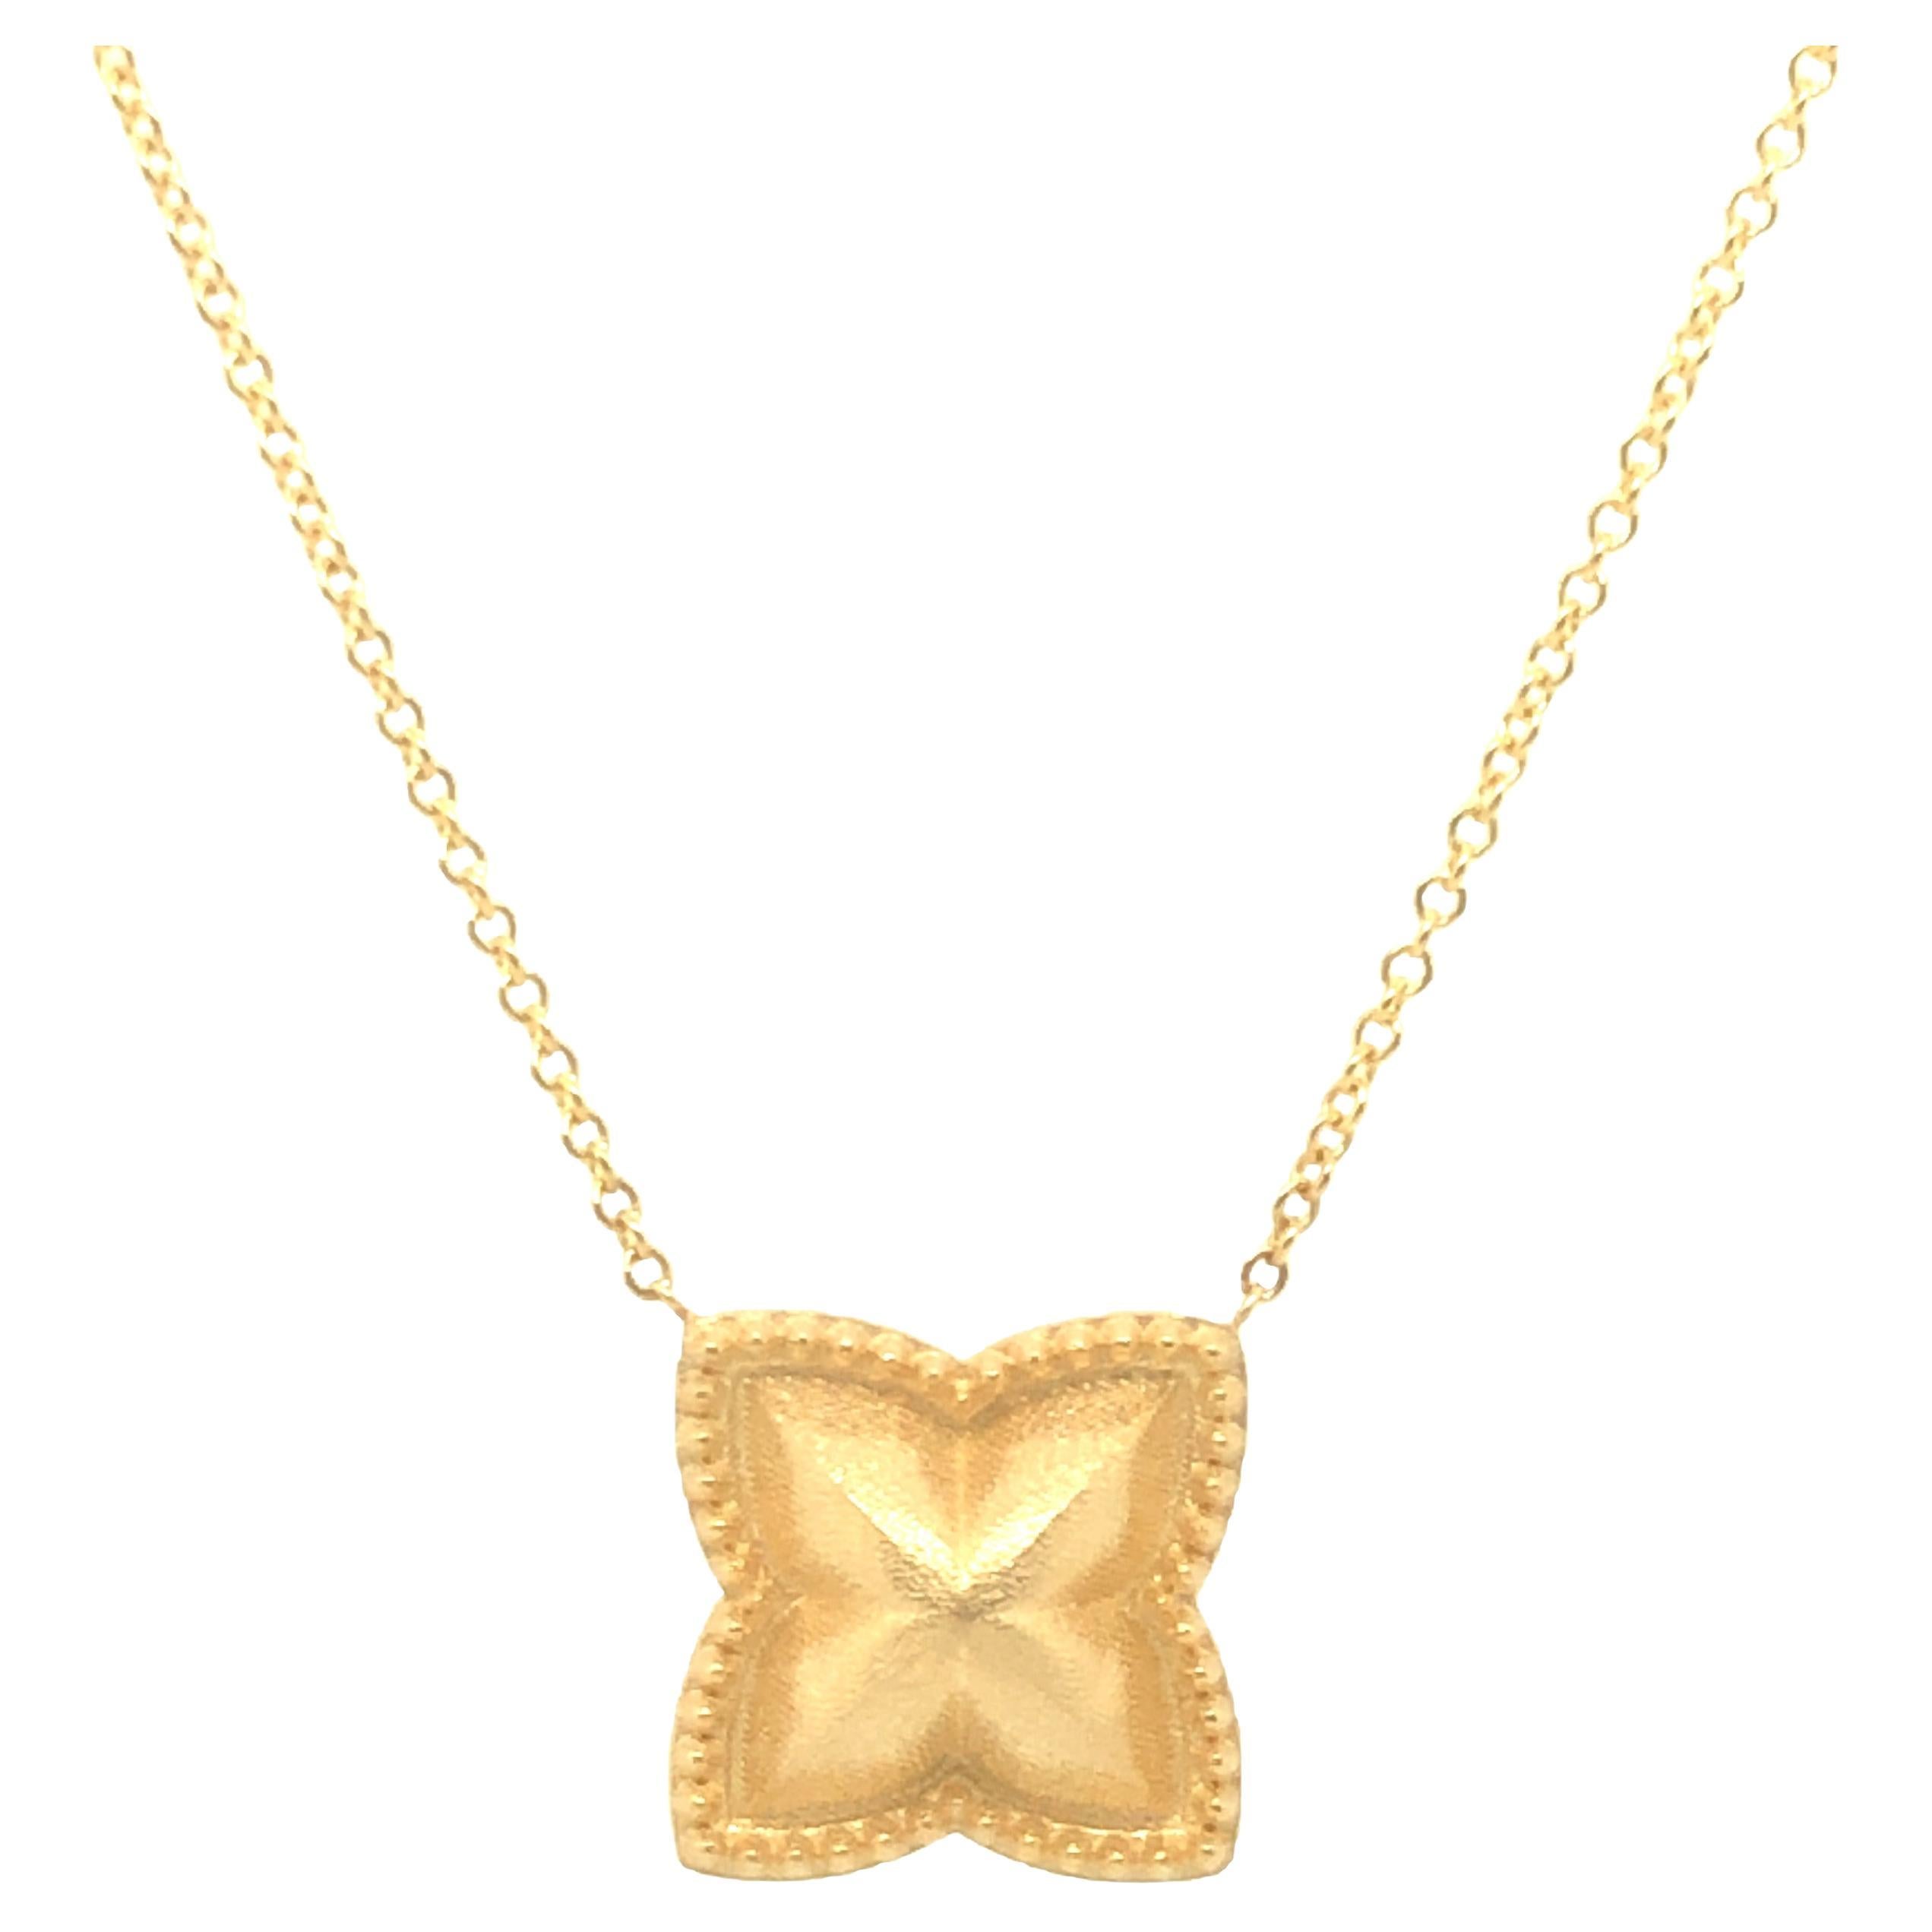 Gems Are Forever Floral Emblem Necklace in 14k Yellow Gold